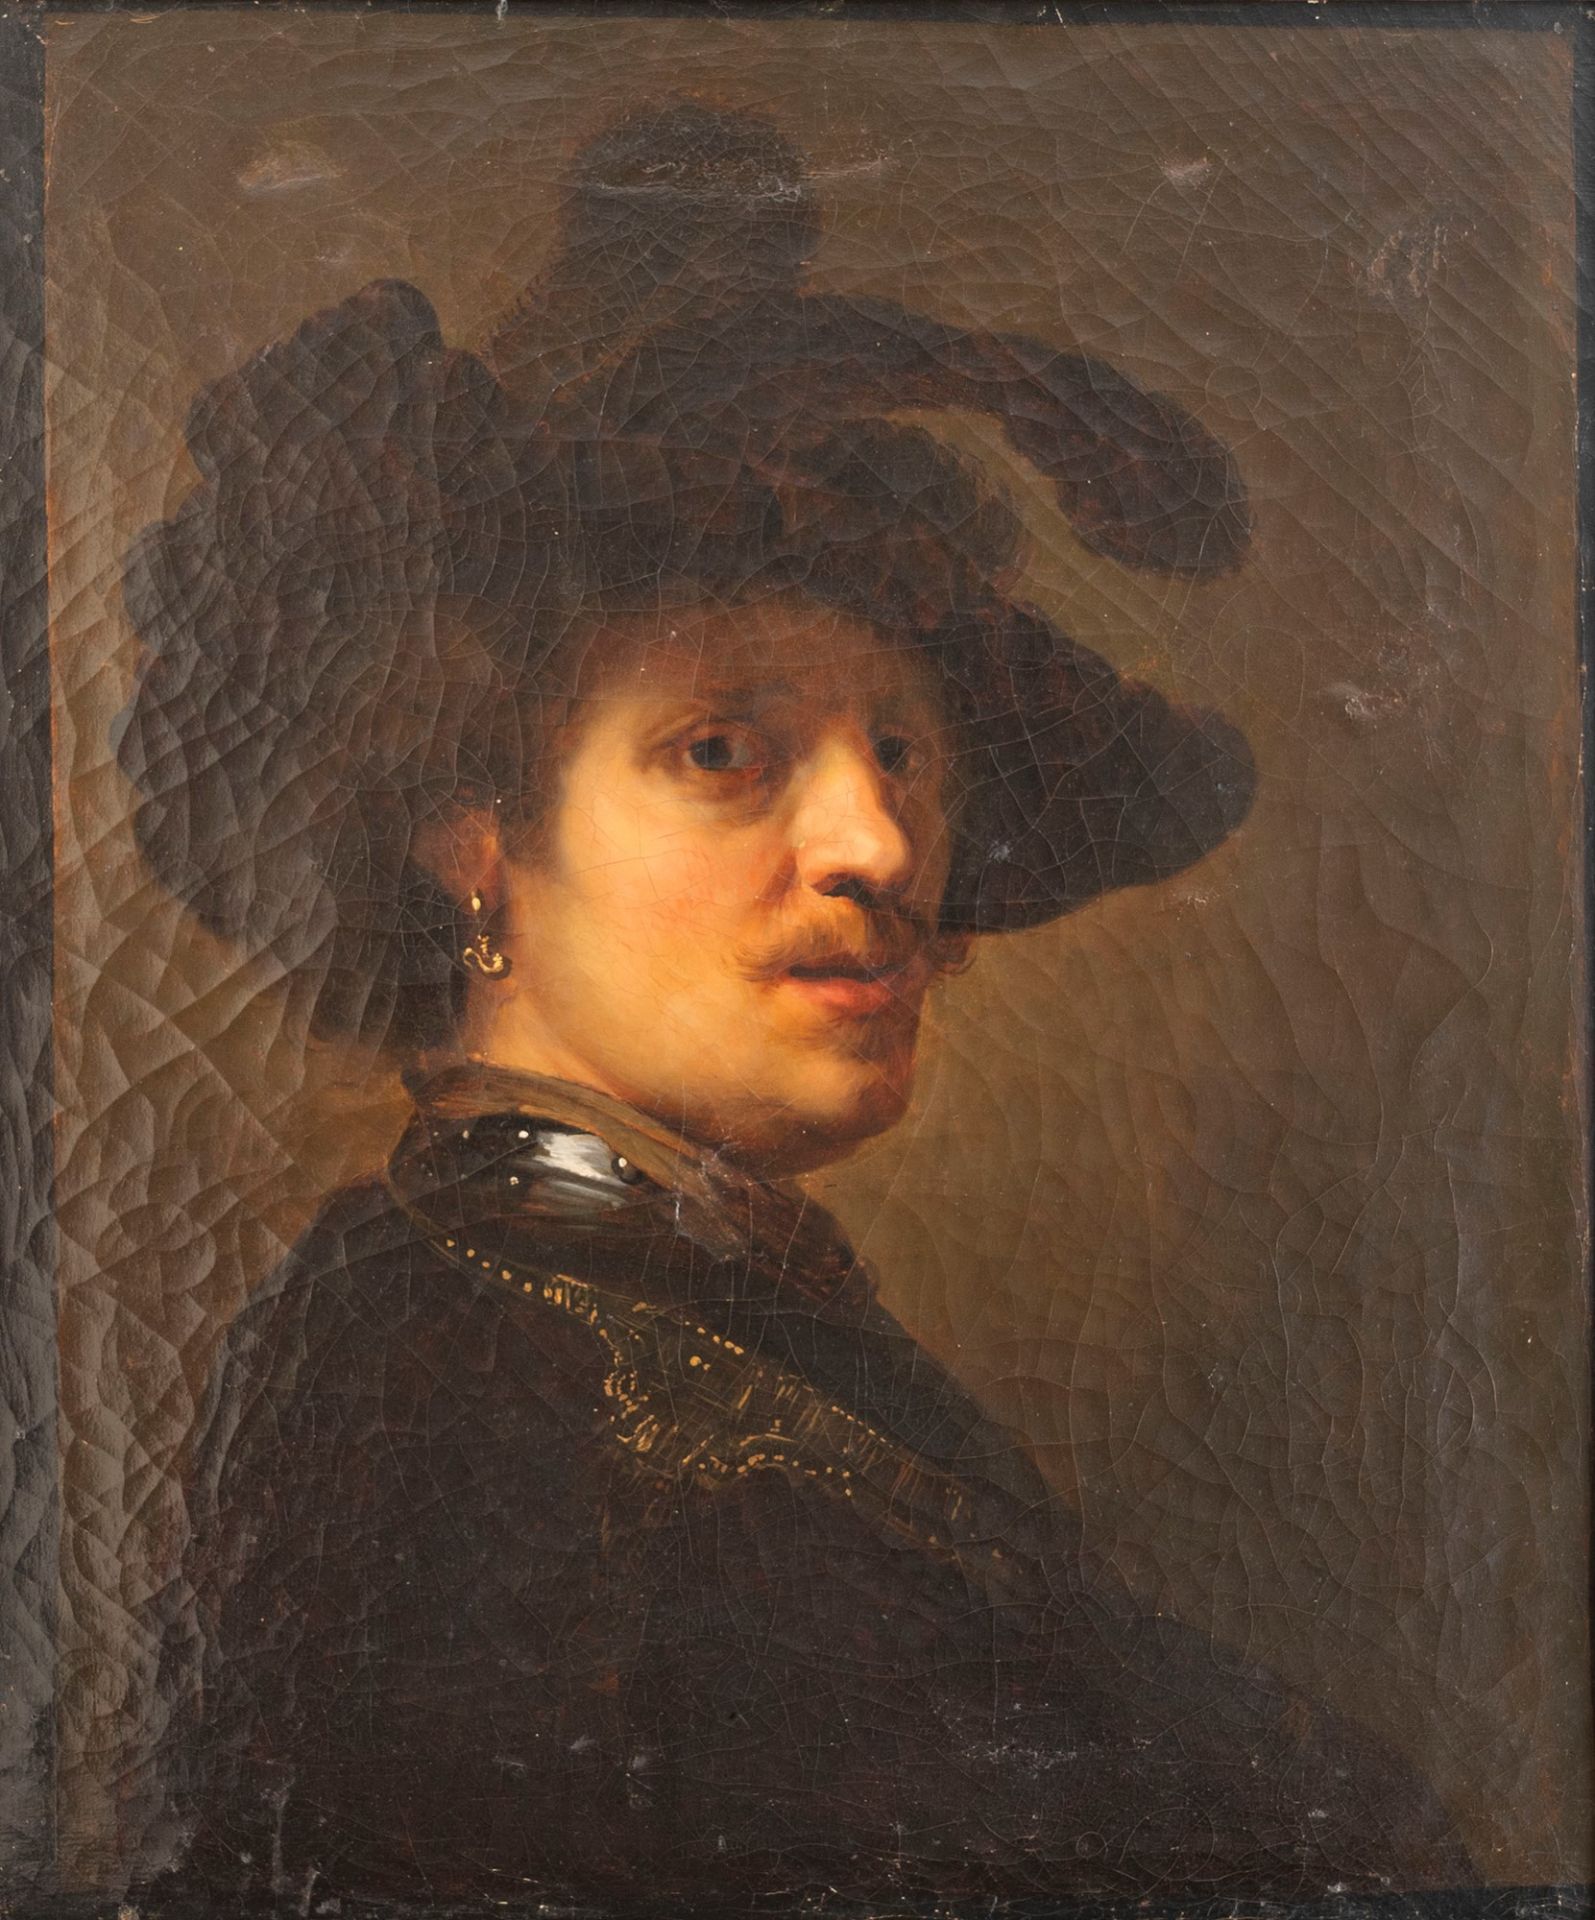 After Rembrandt - Portrait of a man with a plumed hat